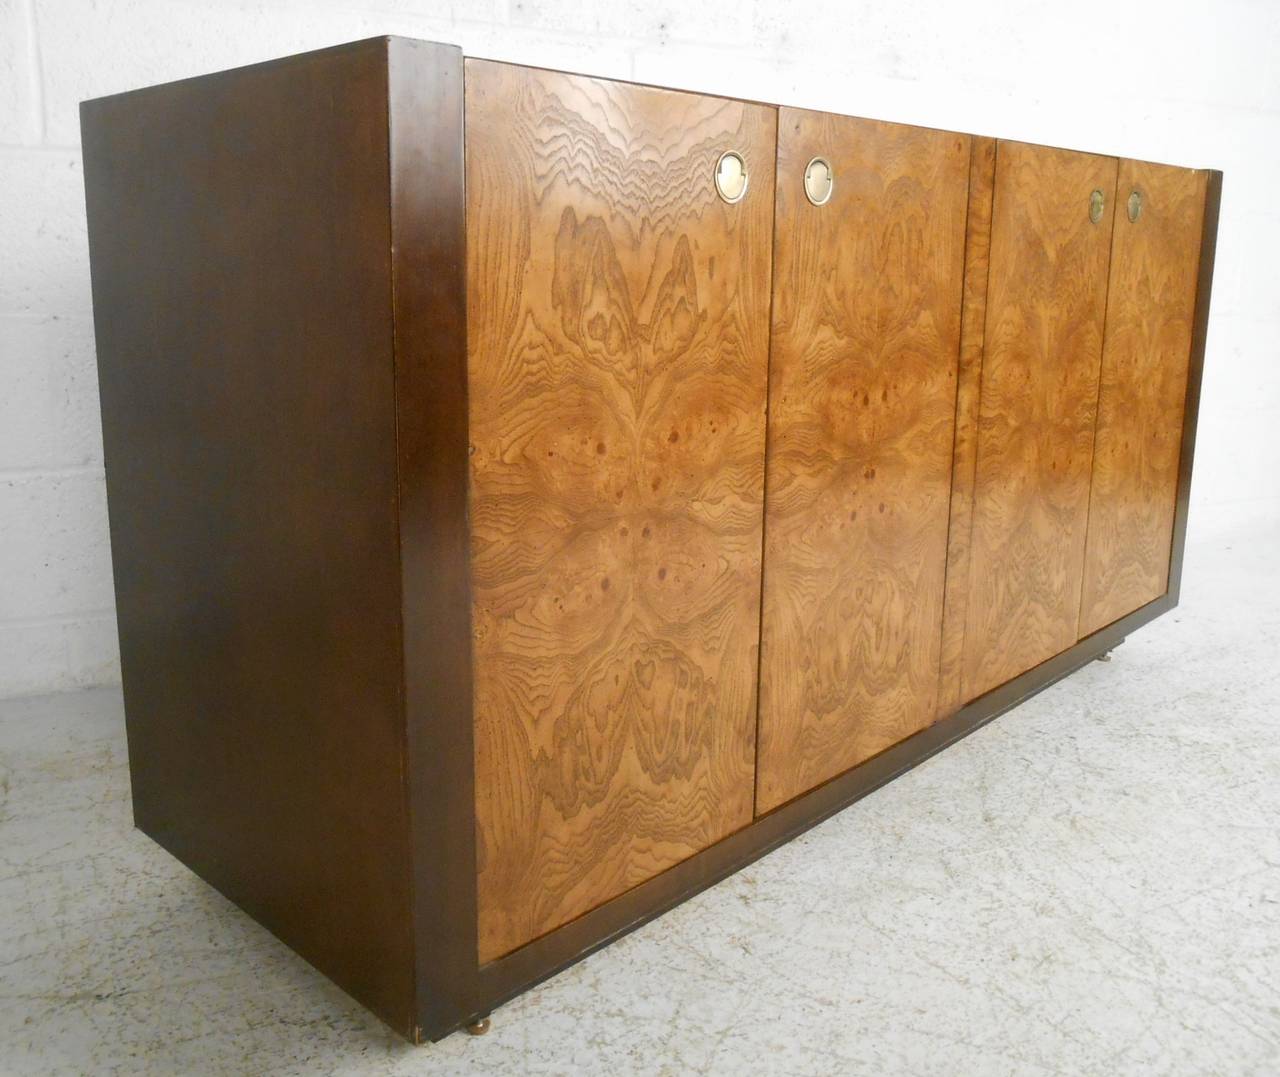 This exquisite burlwood credenza by Century Furniture offers dual cabinets with interior drawers for plenty of space for serving or storage. Unique brass trim pulls and two tone construction make this a wonderful addition to any interior.  Please